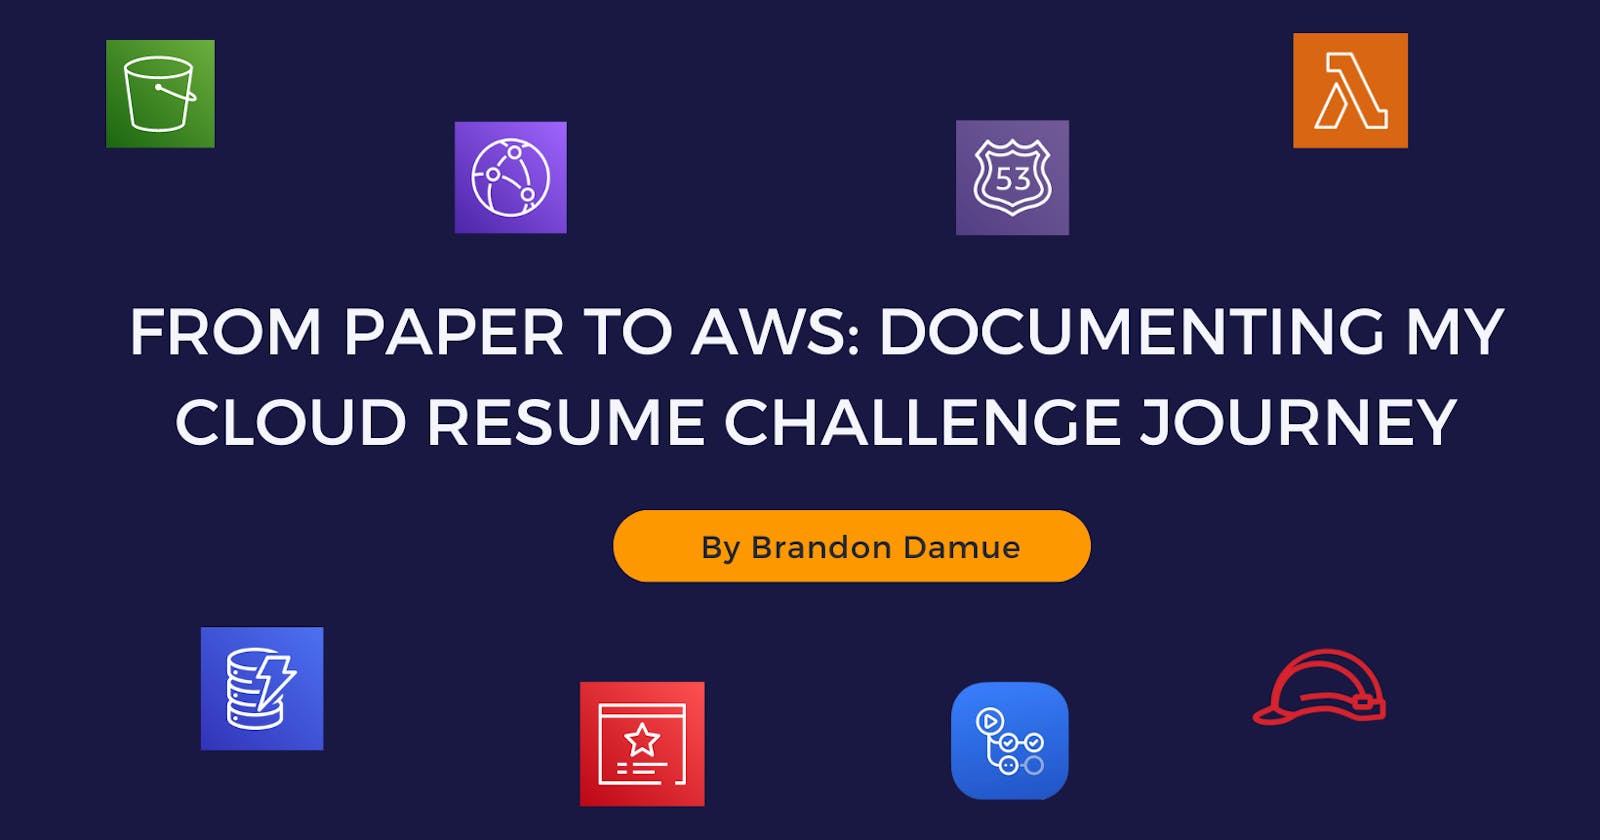 From Paper to AWS: Documenting my Cloud Resume Challenge journey